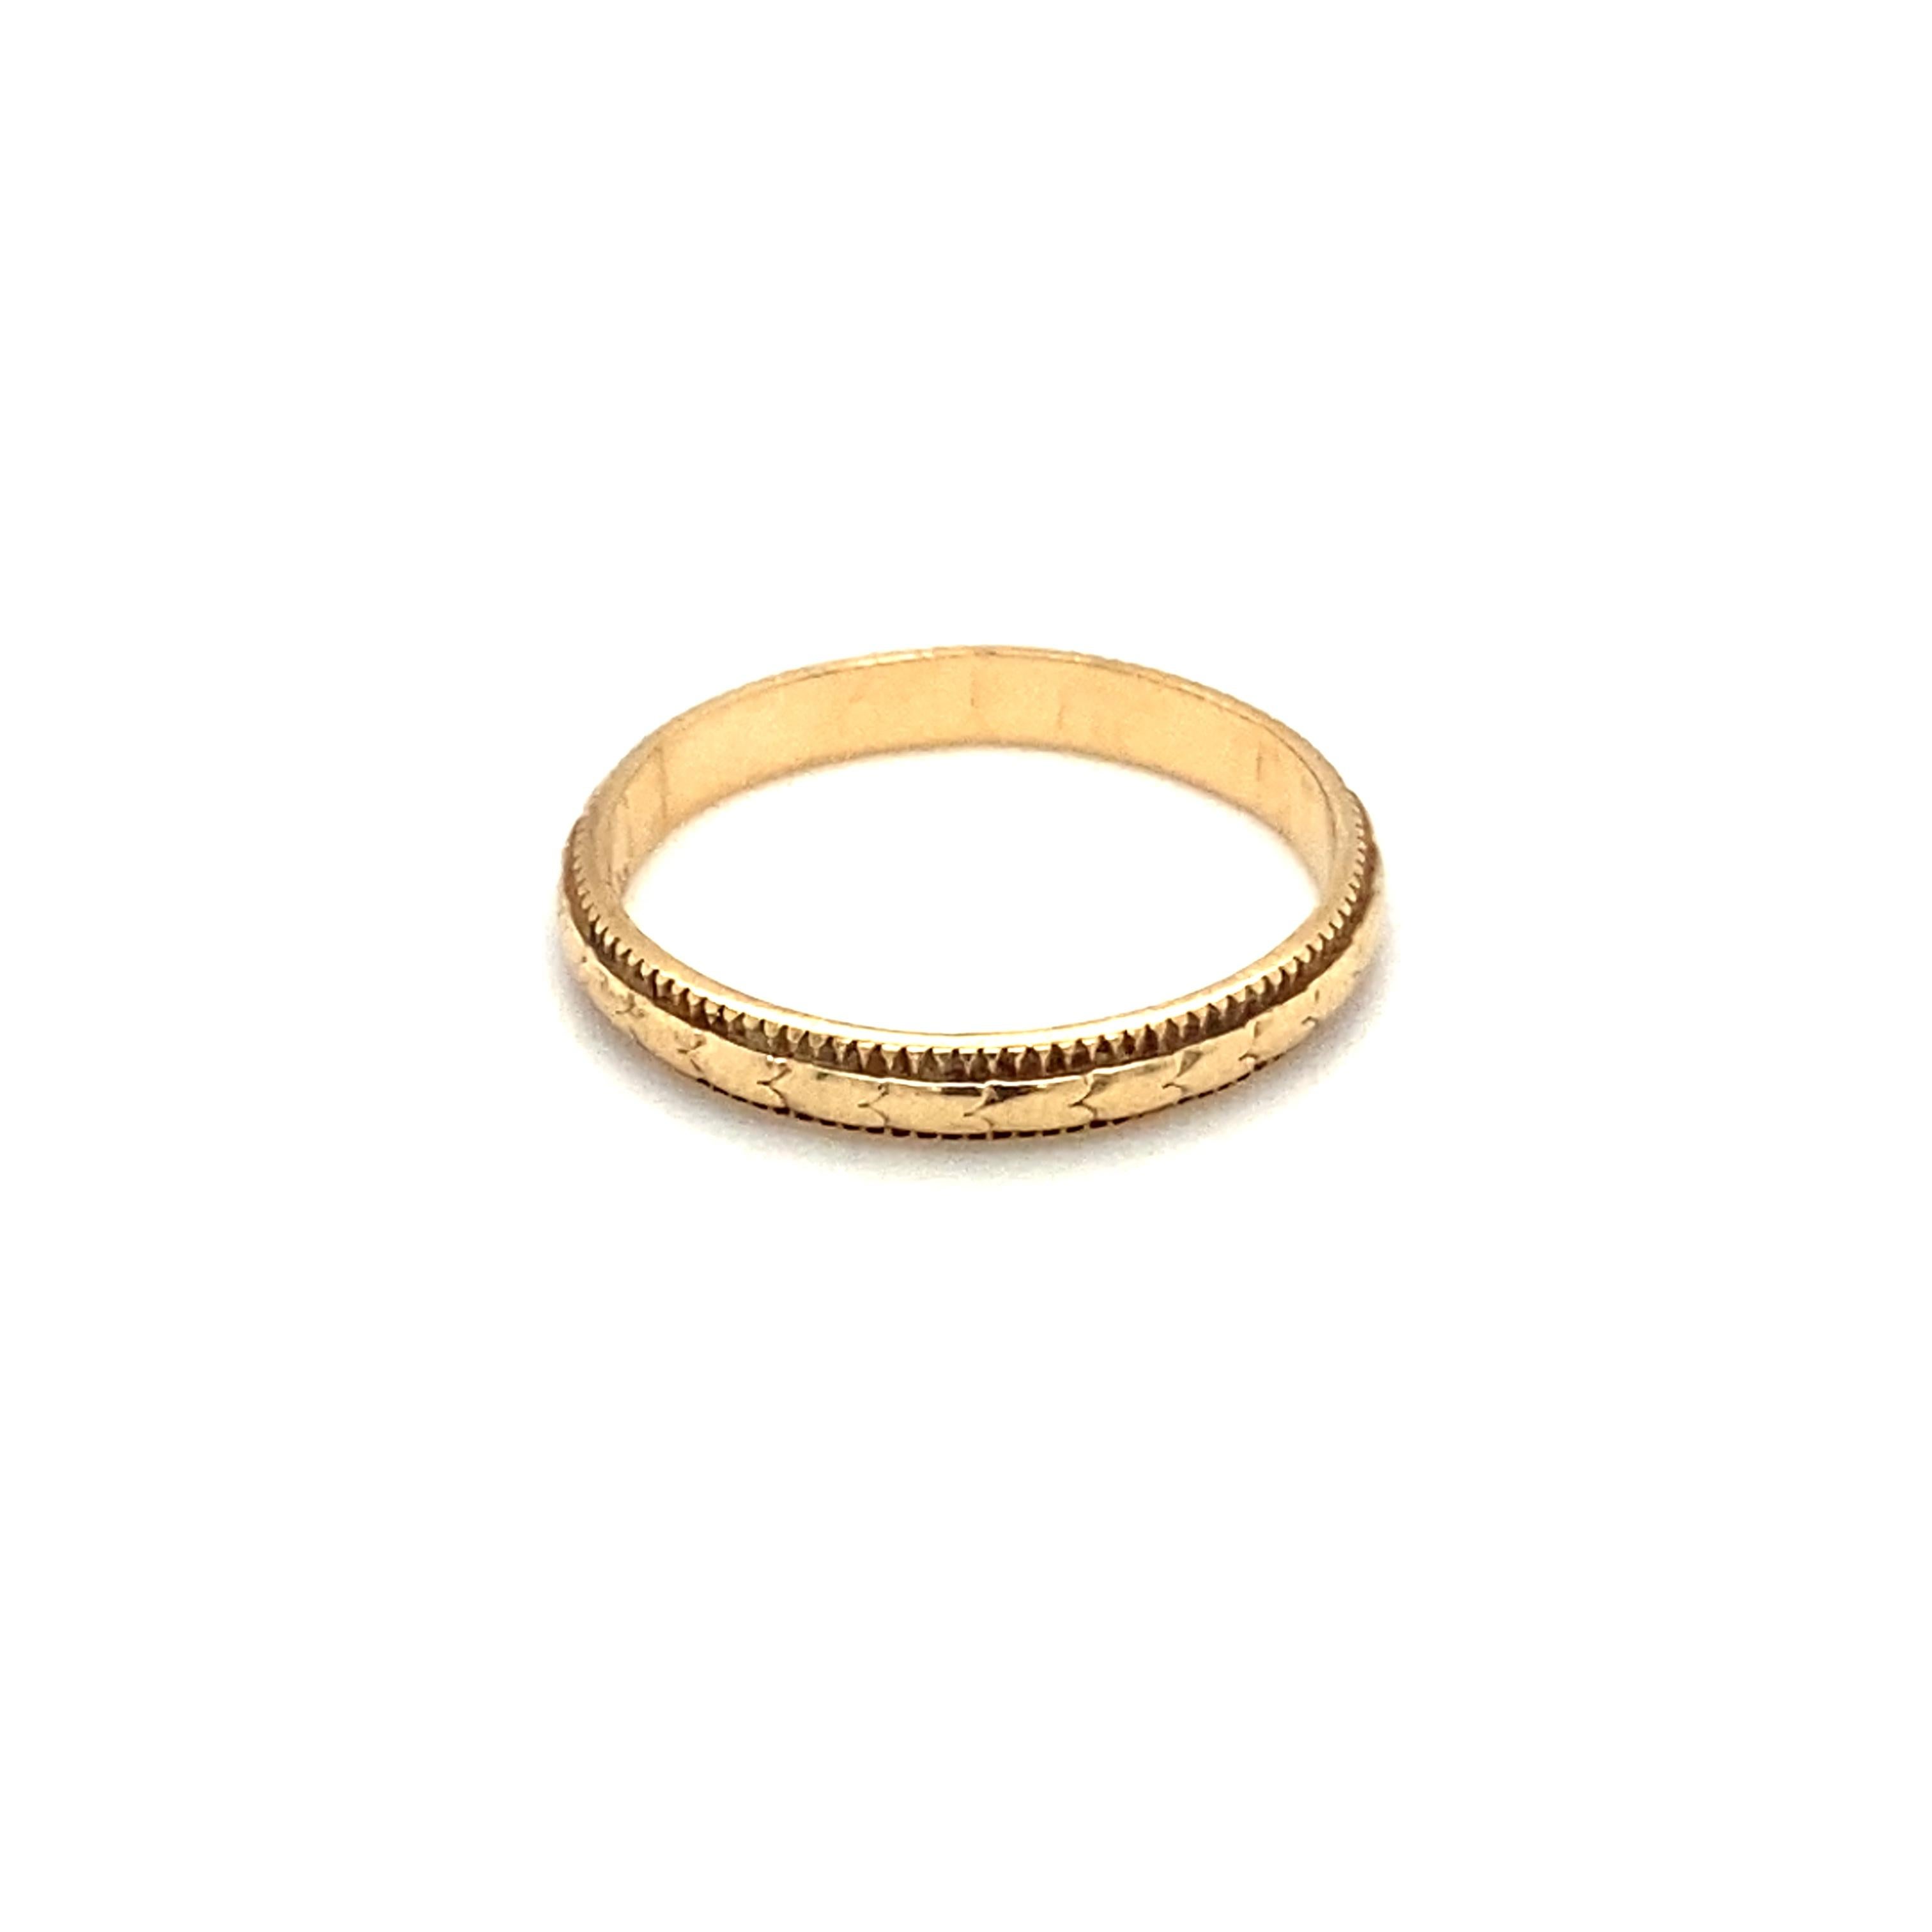 Women's or Men's Circa 1920s, Art Deco Etched Gold Band Ring in 14 Karat Yellow Gold For Sale